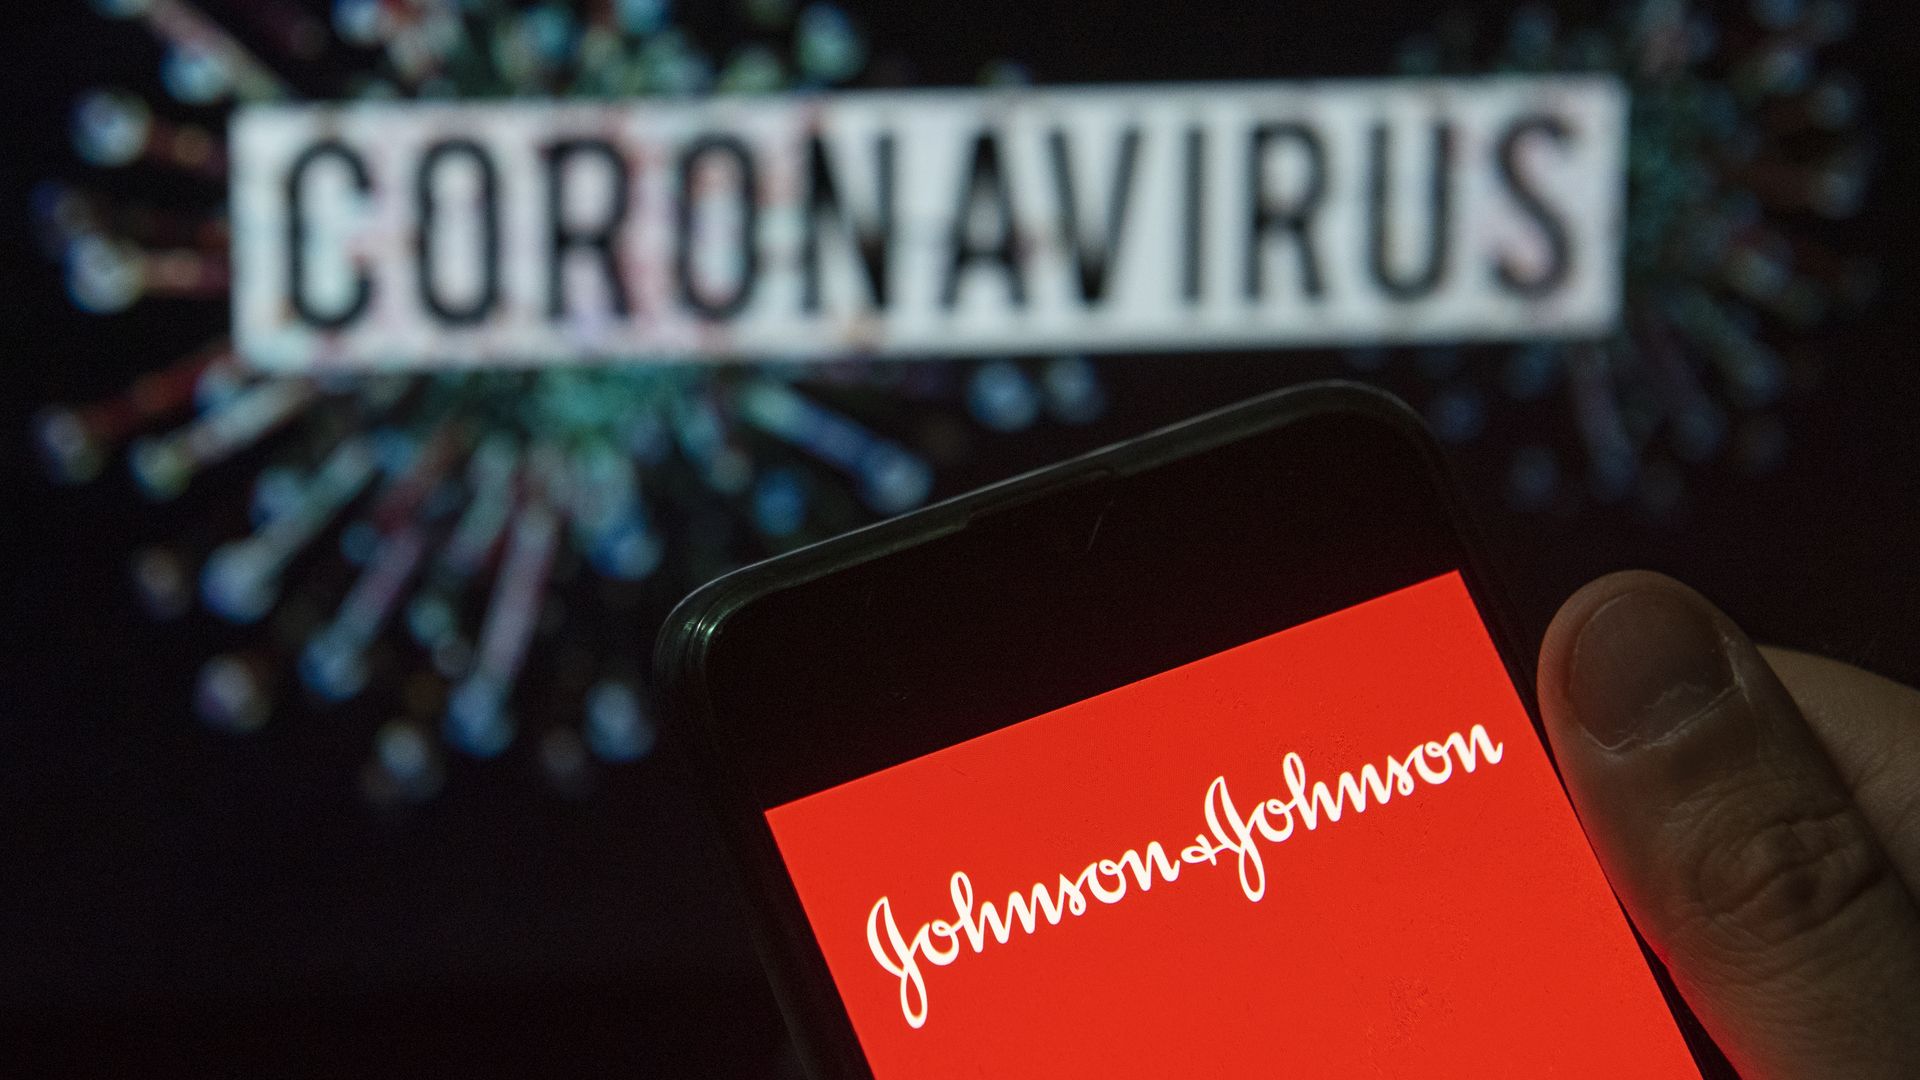 Red Johnson & Johnson logo in front of a background that says "Coronavirus."